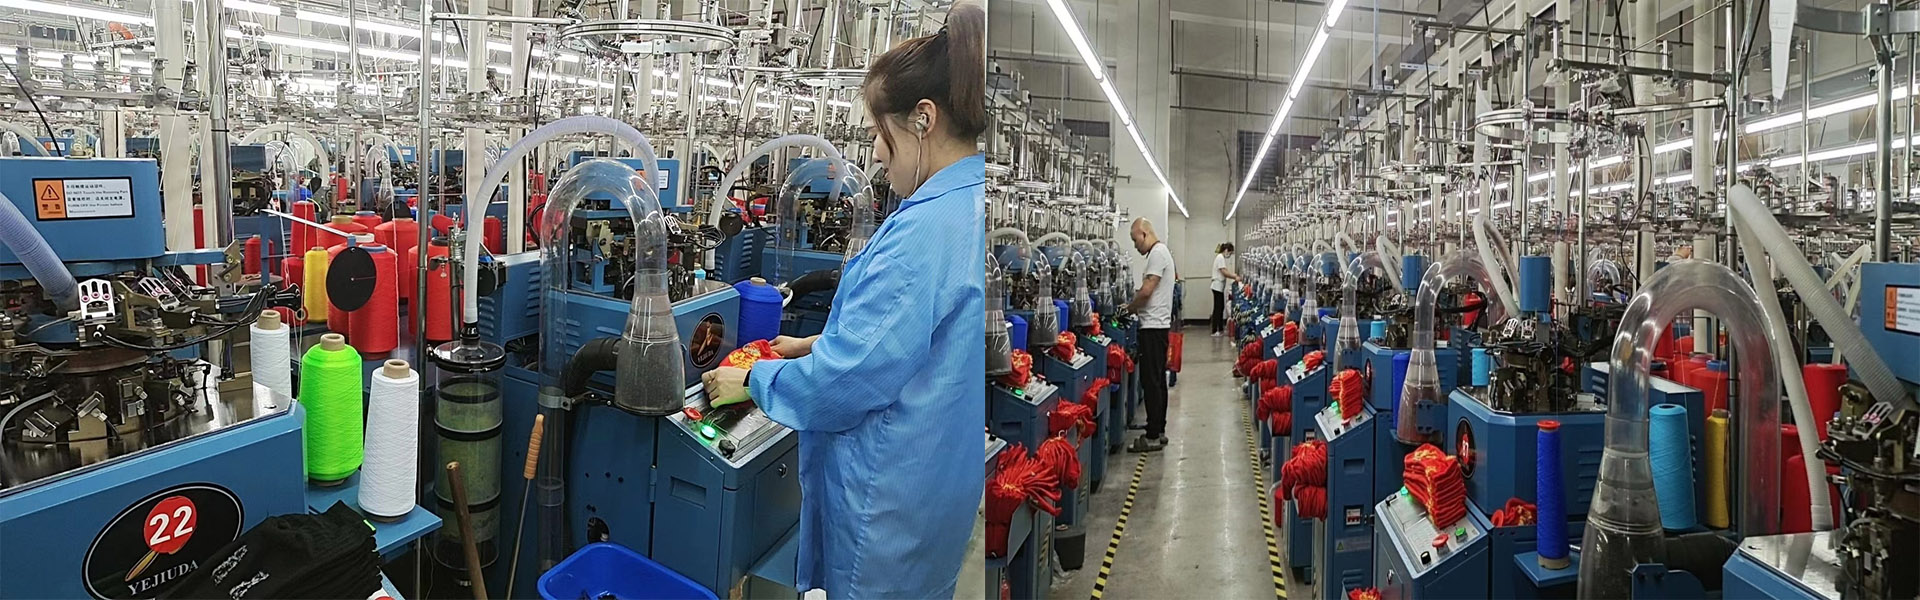 Gowin Socks factory product department.jpg